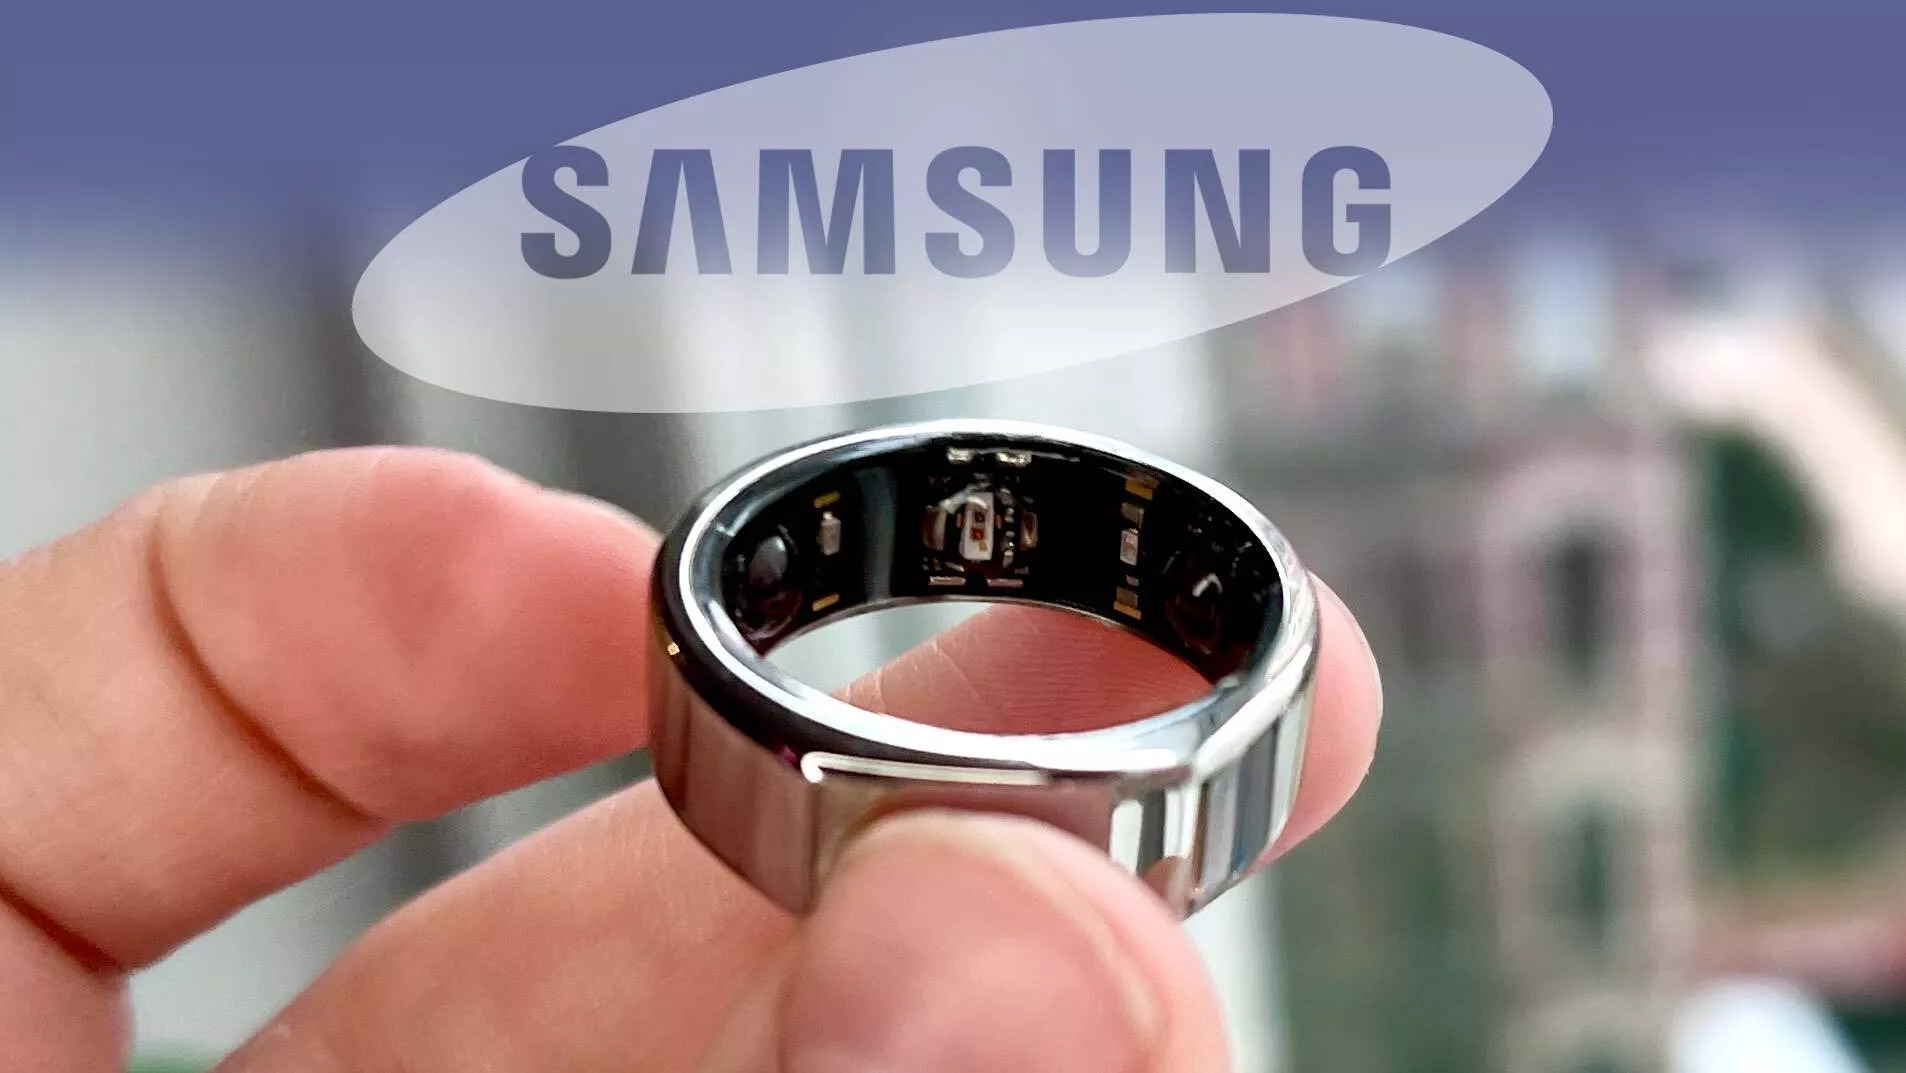 Samsung Galaxy Ring with 5-9 days of autonomy will be released in the second half of the year

